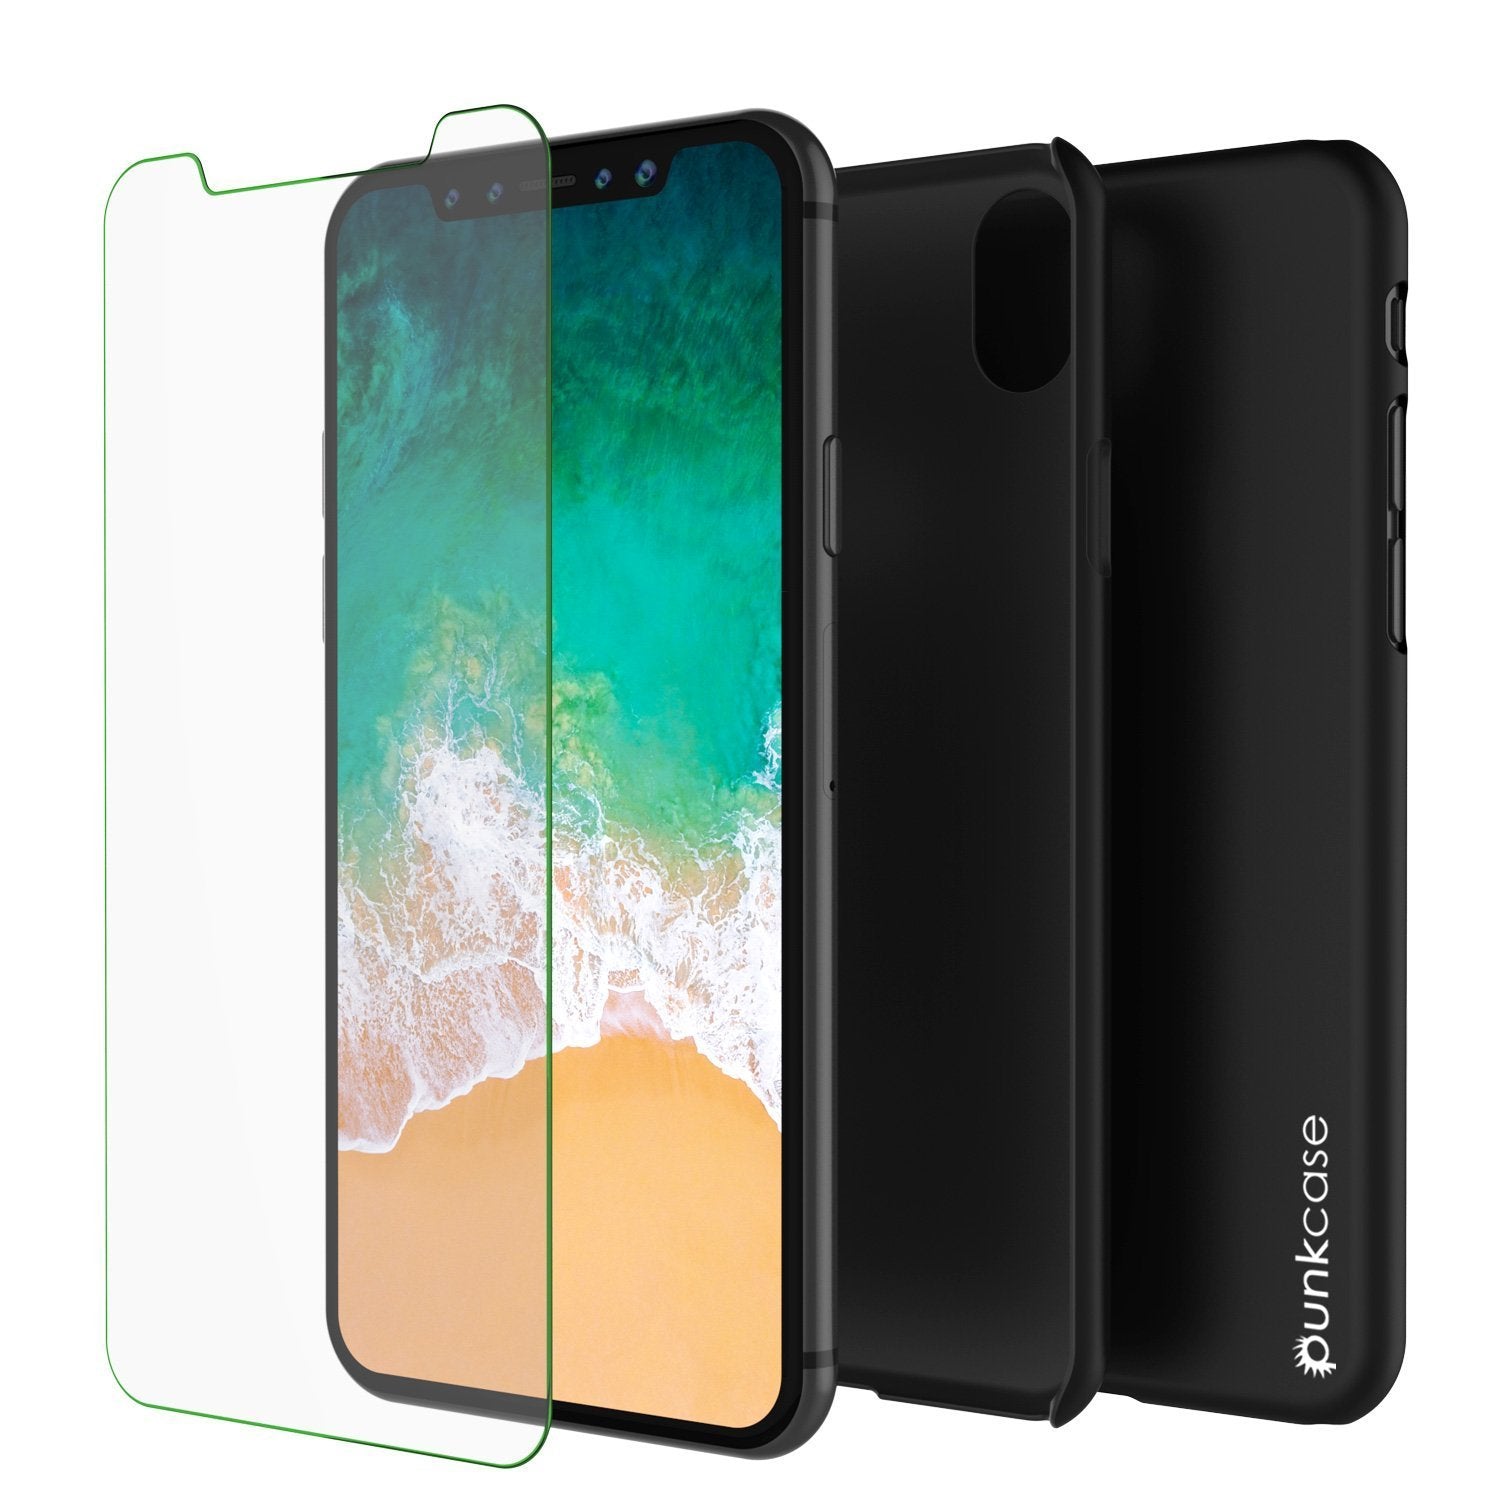 iPhone X Case, Punkcase [Solid Series] Ultra Thin Cover [shockproof] [dirtproof] for Apple iPhone 10 [Black]